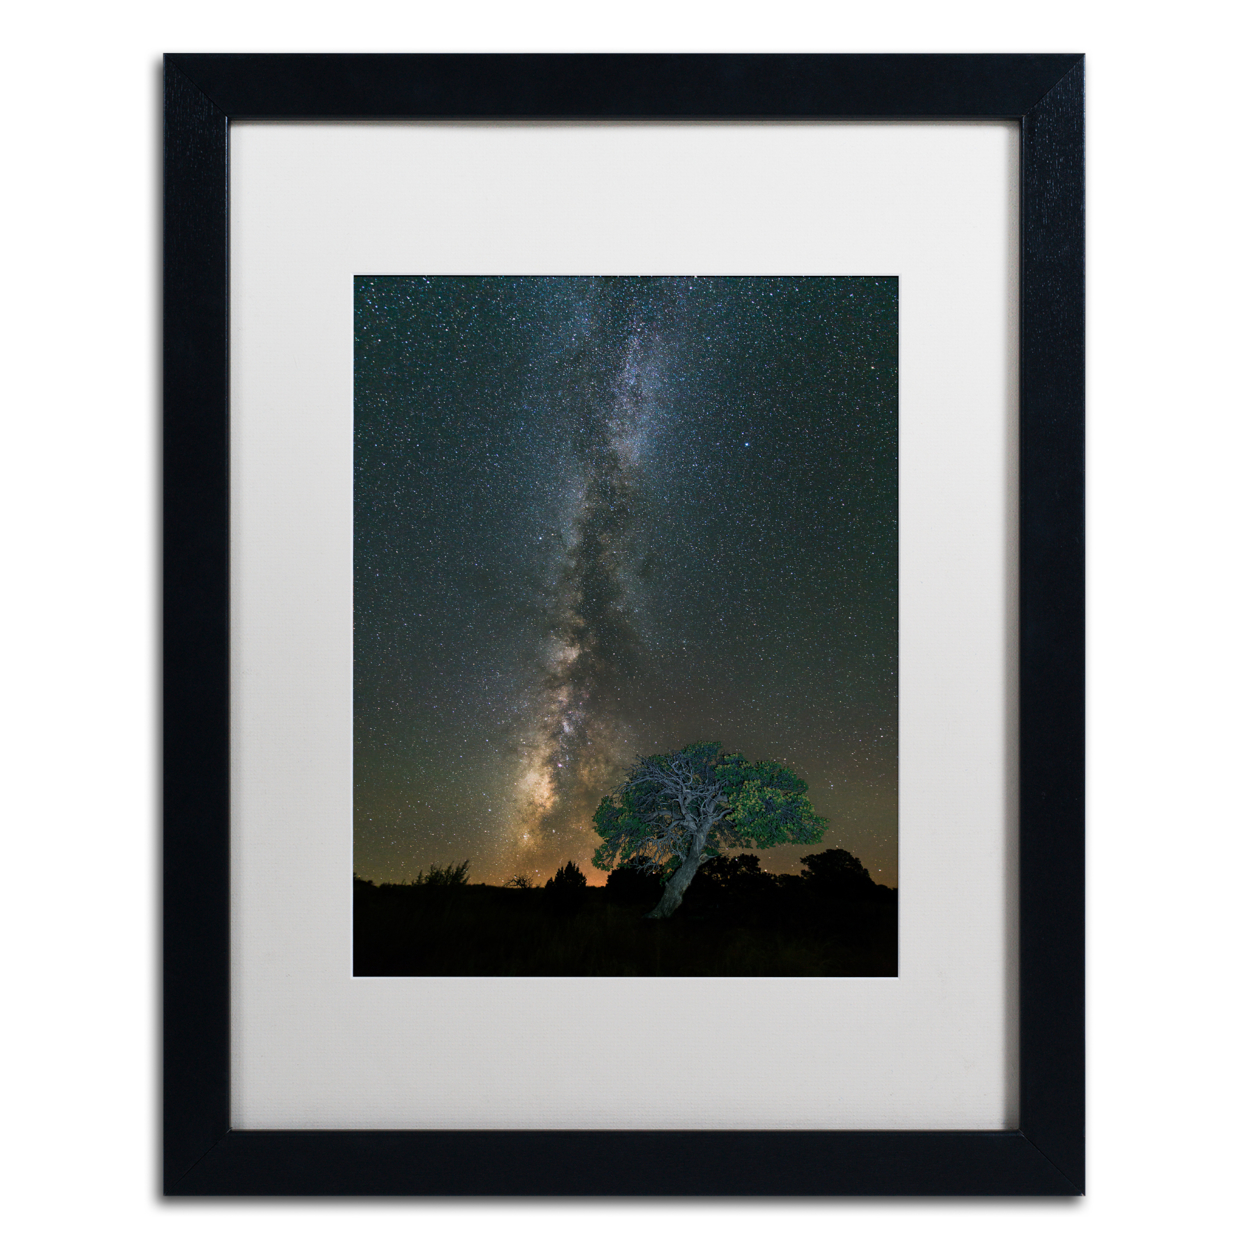 Michael Blanchette Photography 'Stars Over Pinon' Black Wooden Framed Art 18 X 22 Inches